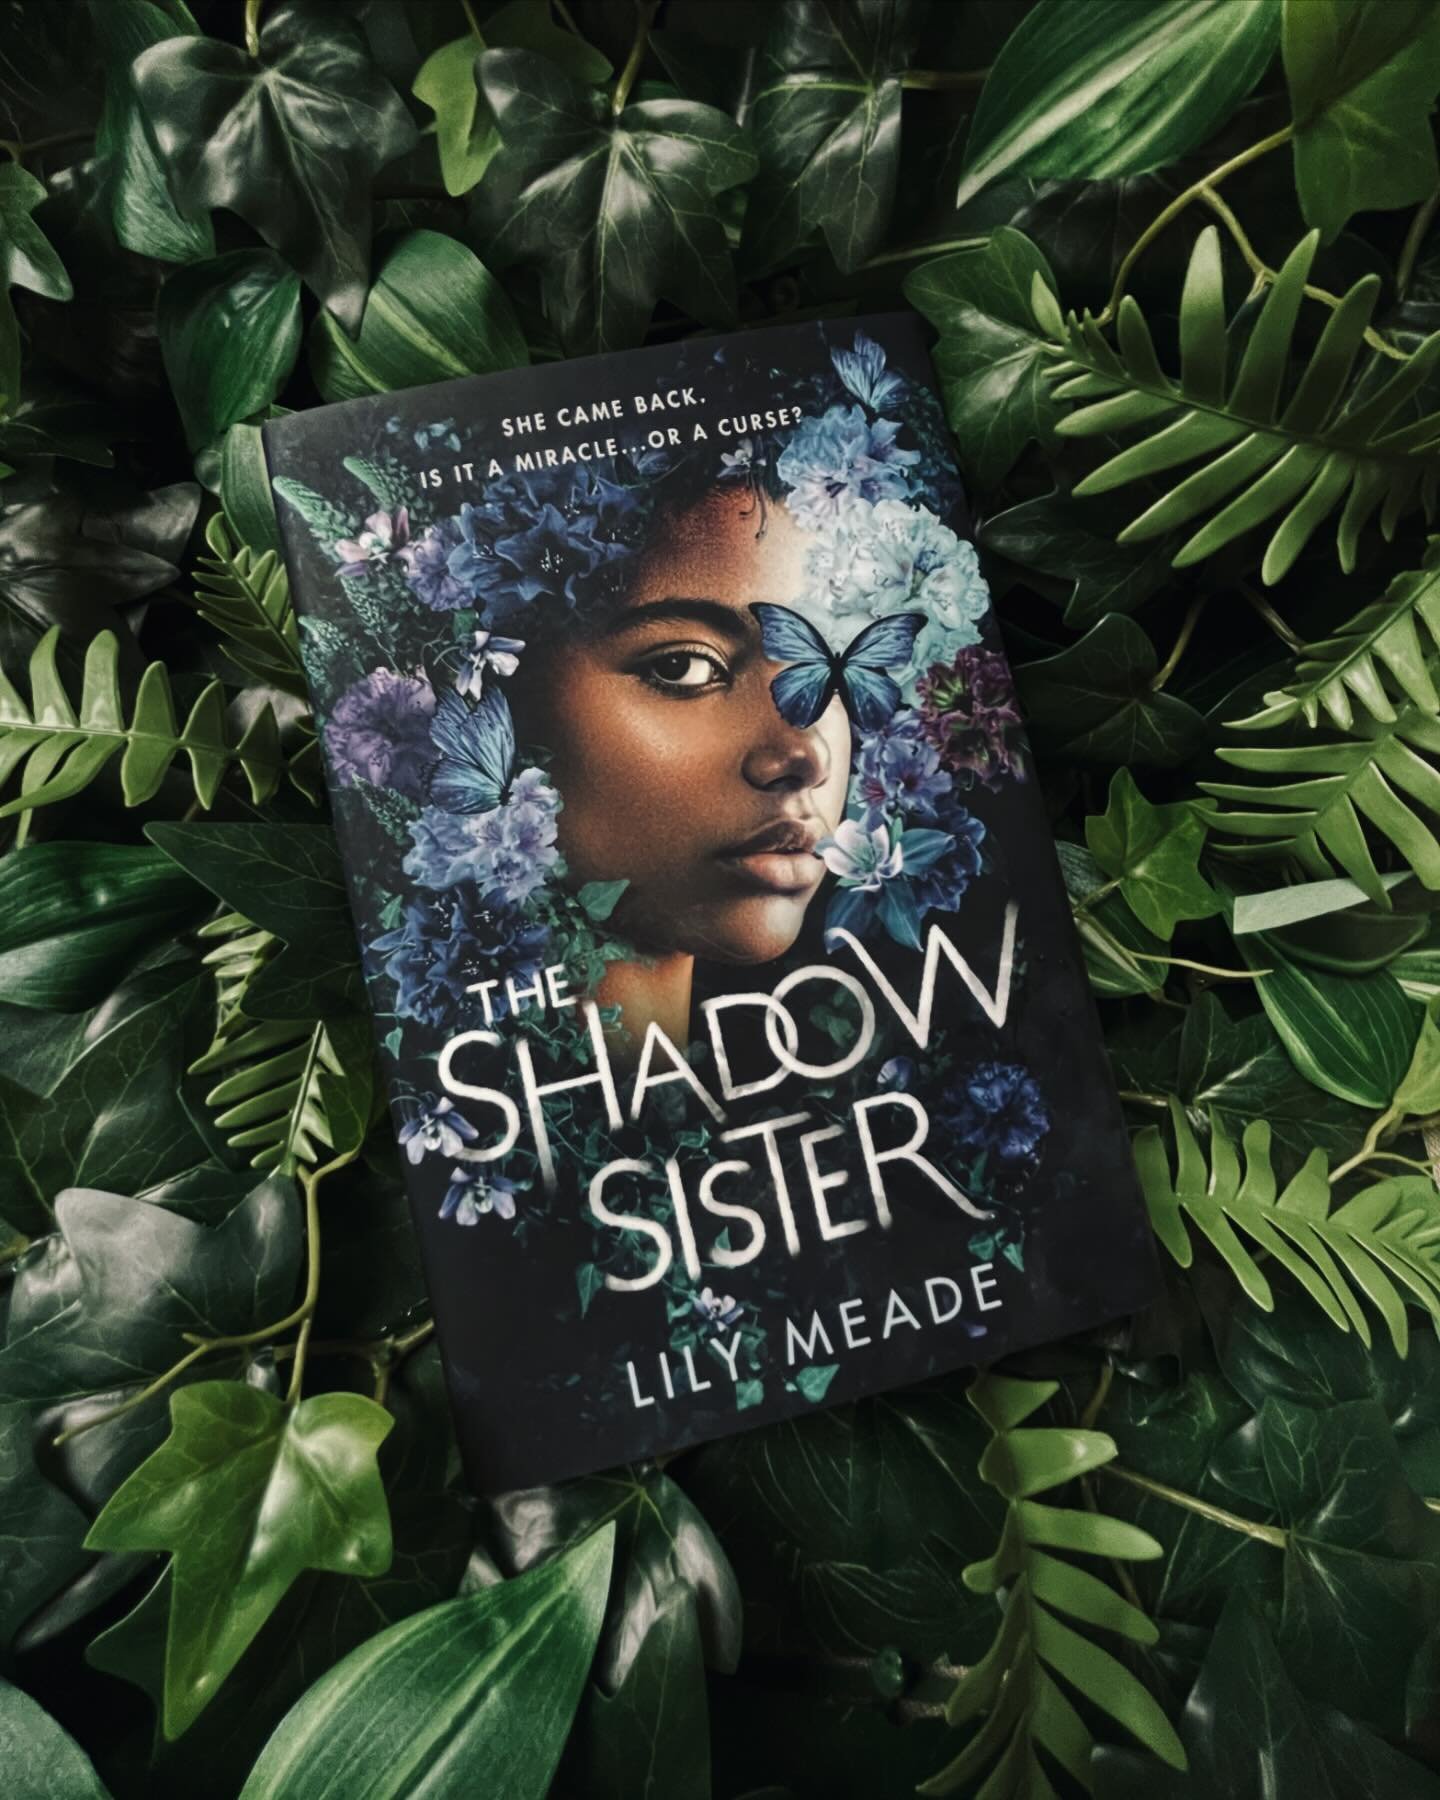 😍Look at herrrrr 🦋💐 @lilymeade &lsquo;s The Shadow Sister is SO beautiful!! I was super excited when I realized I had the perfect backdrop for this shot, too, lol 🌿

~~~

I haven&rsquo;t had a chance to read it yet but I&rsquo;m super excited!! I